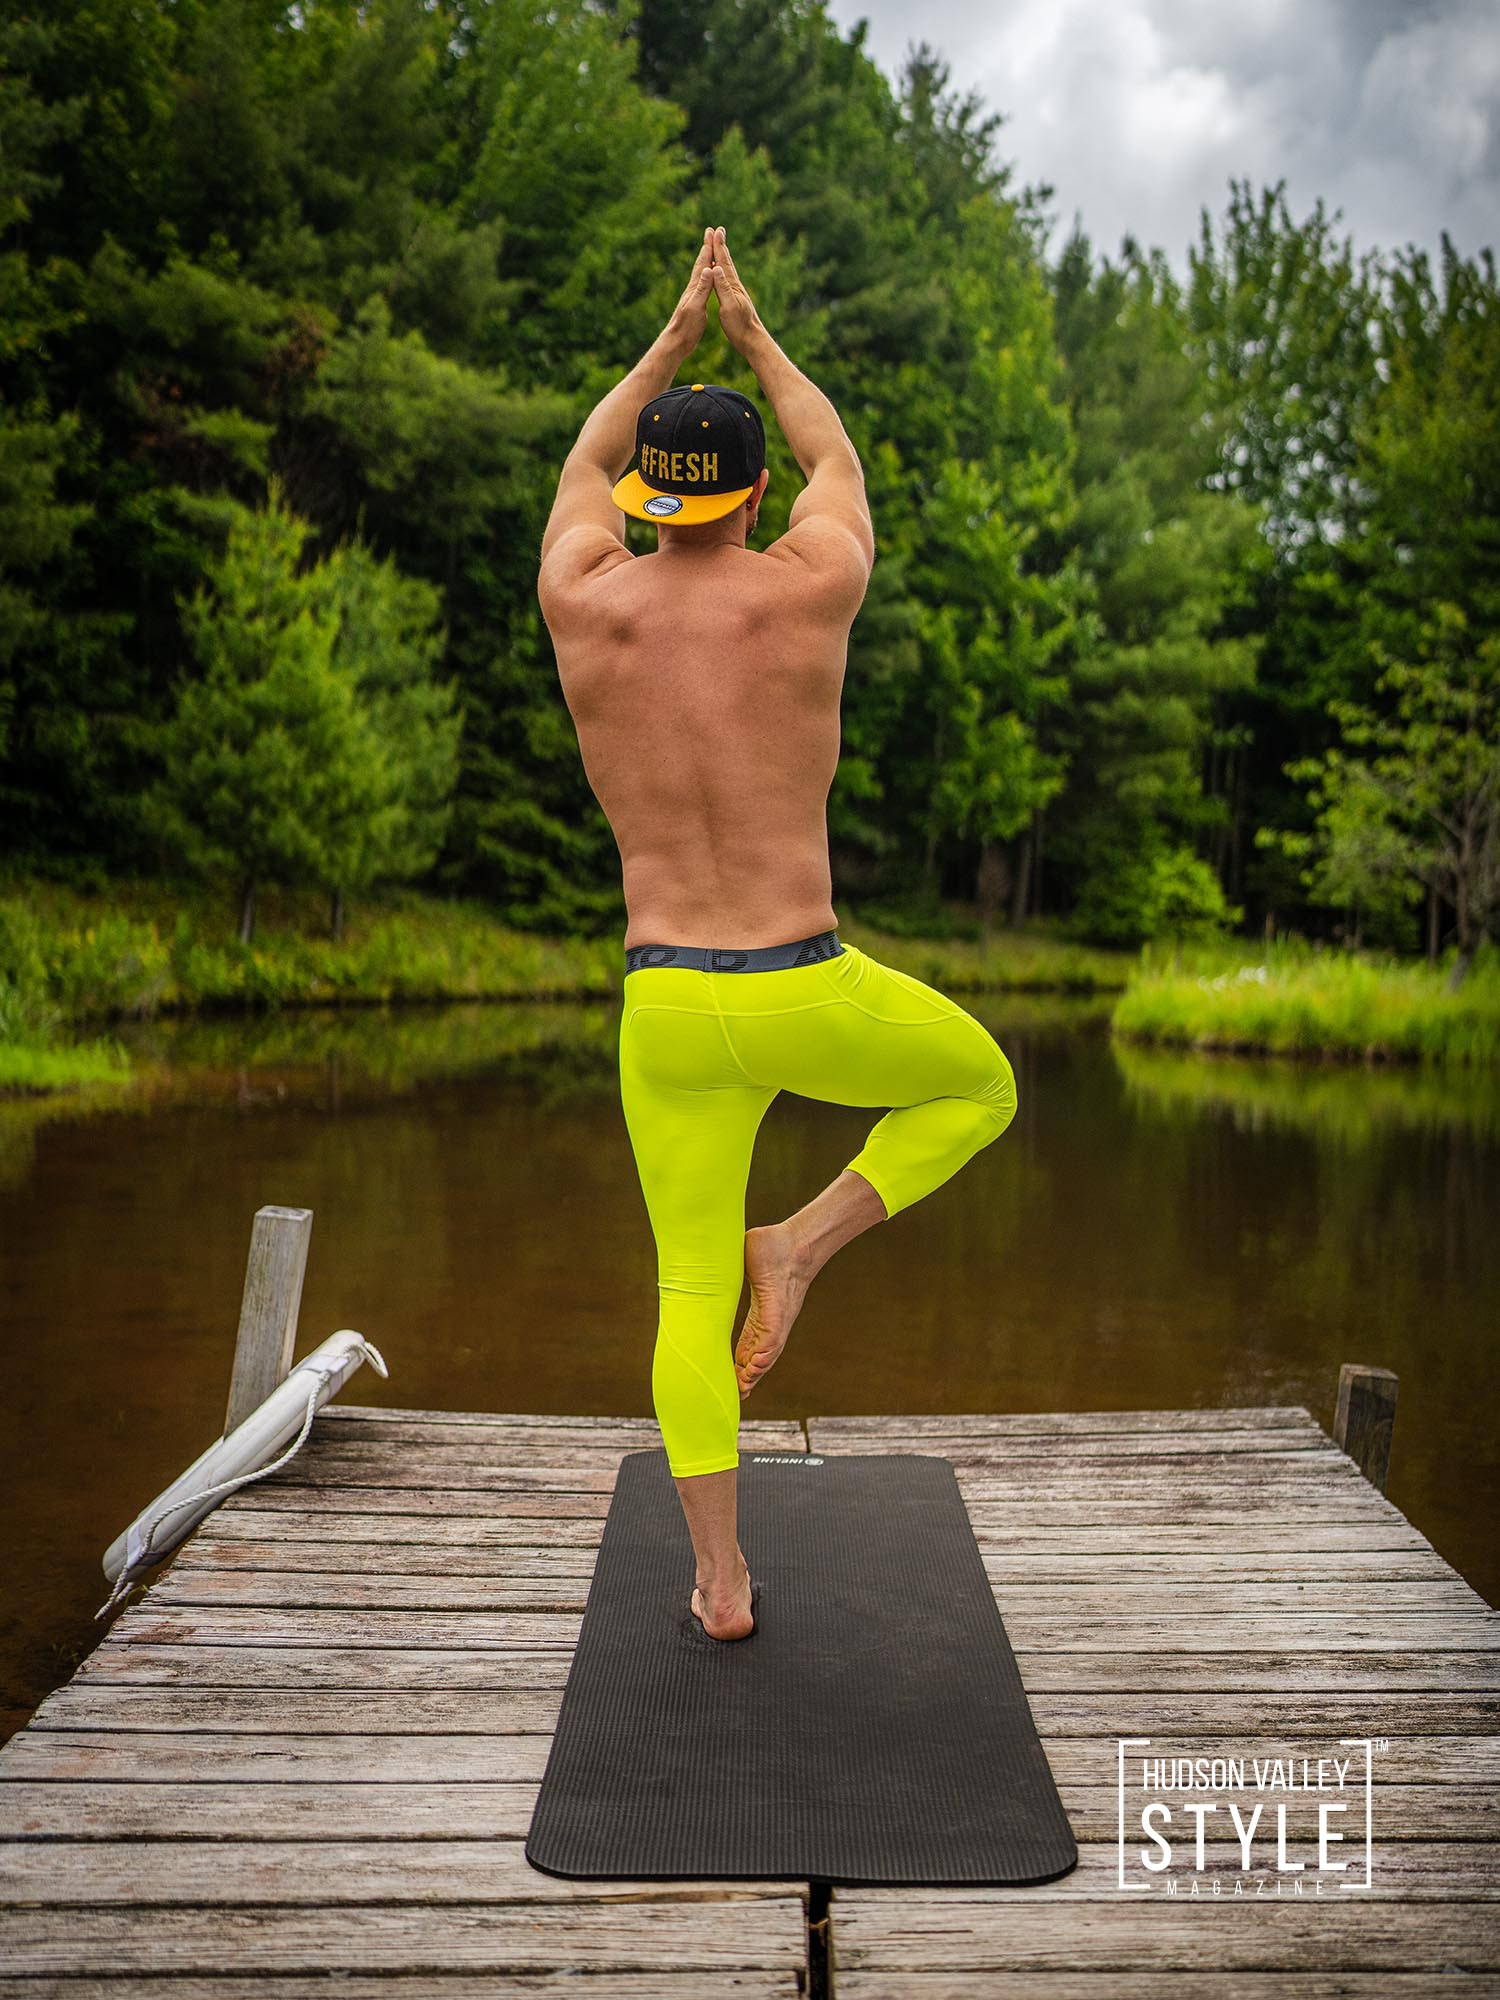 Style, Substance, and Sun Protection: Why ATHLIO Men's Workout Leggings Are a Must-Have – Product Reviews with Fitness Model/Bodybuilding Coach Maxwell Alexander – Men's Yoga Pants Review